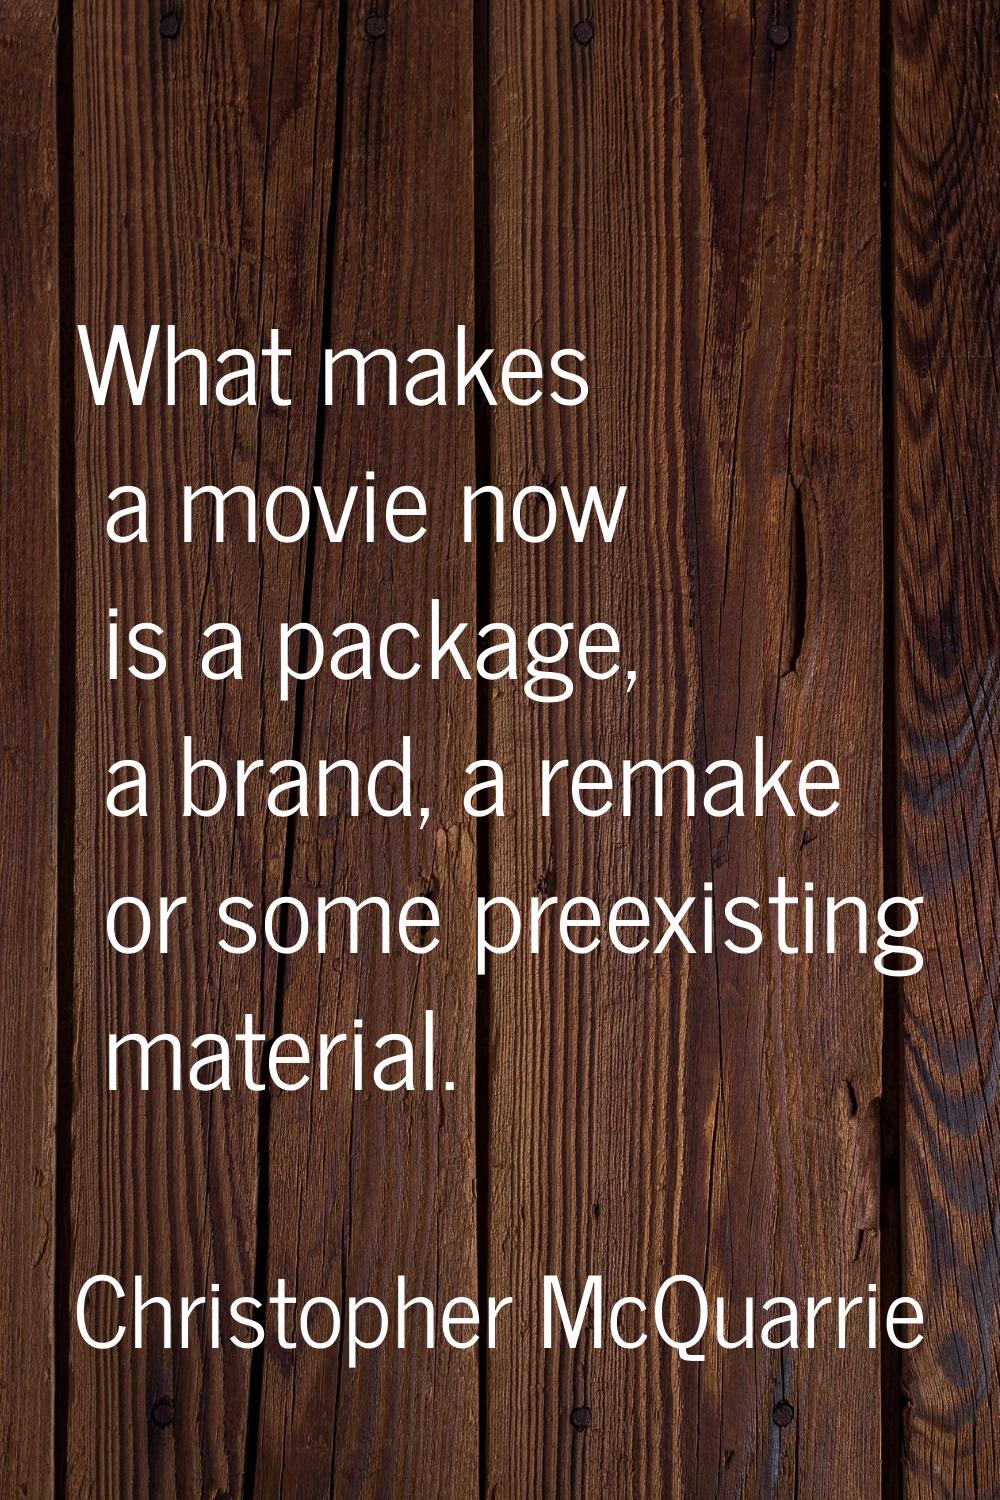 What makes a movie now is a package, a brand, a remake or some preexisting material.